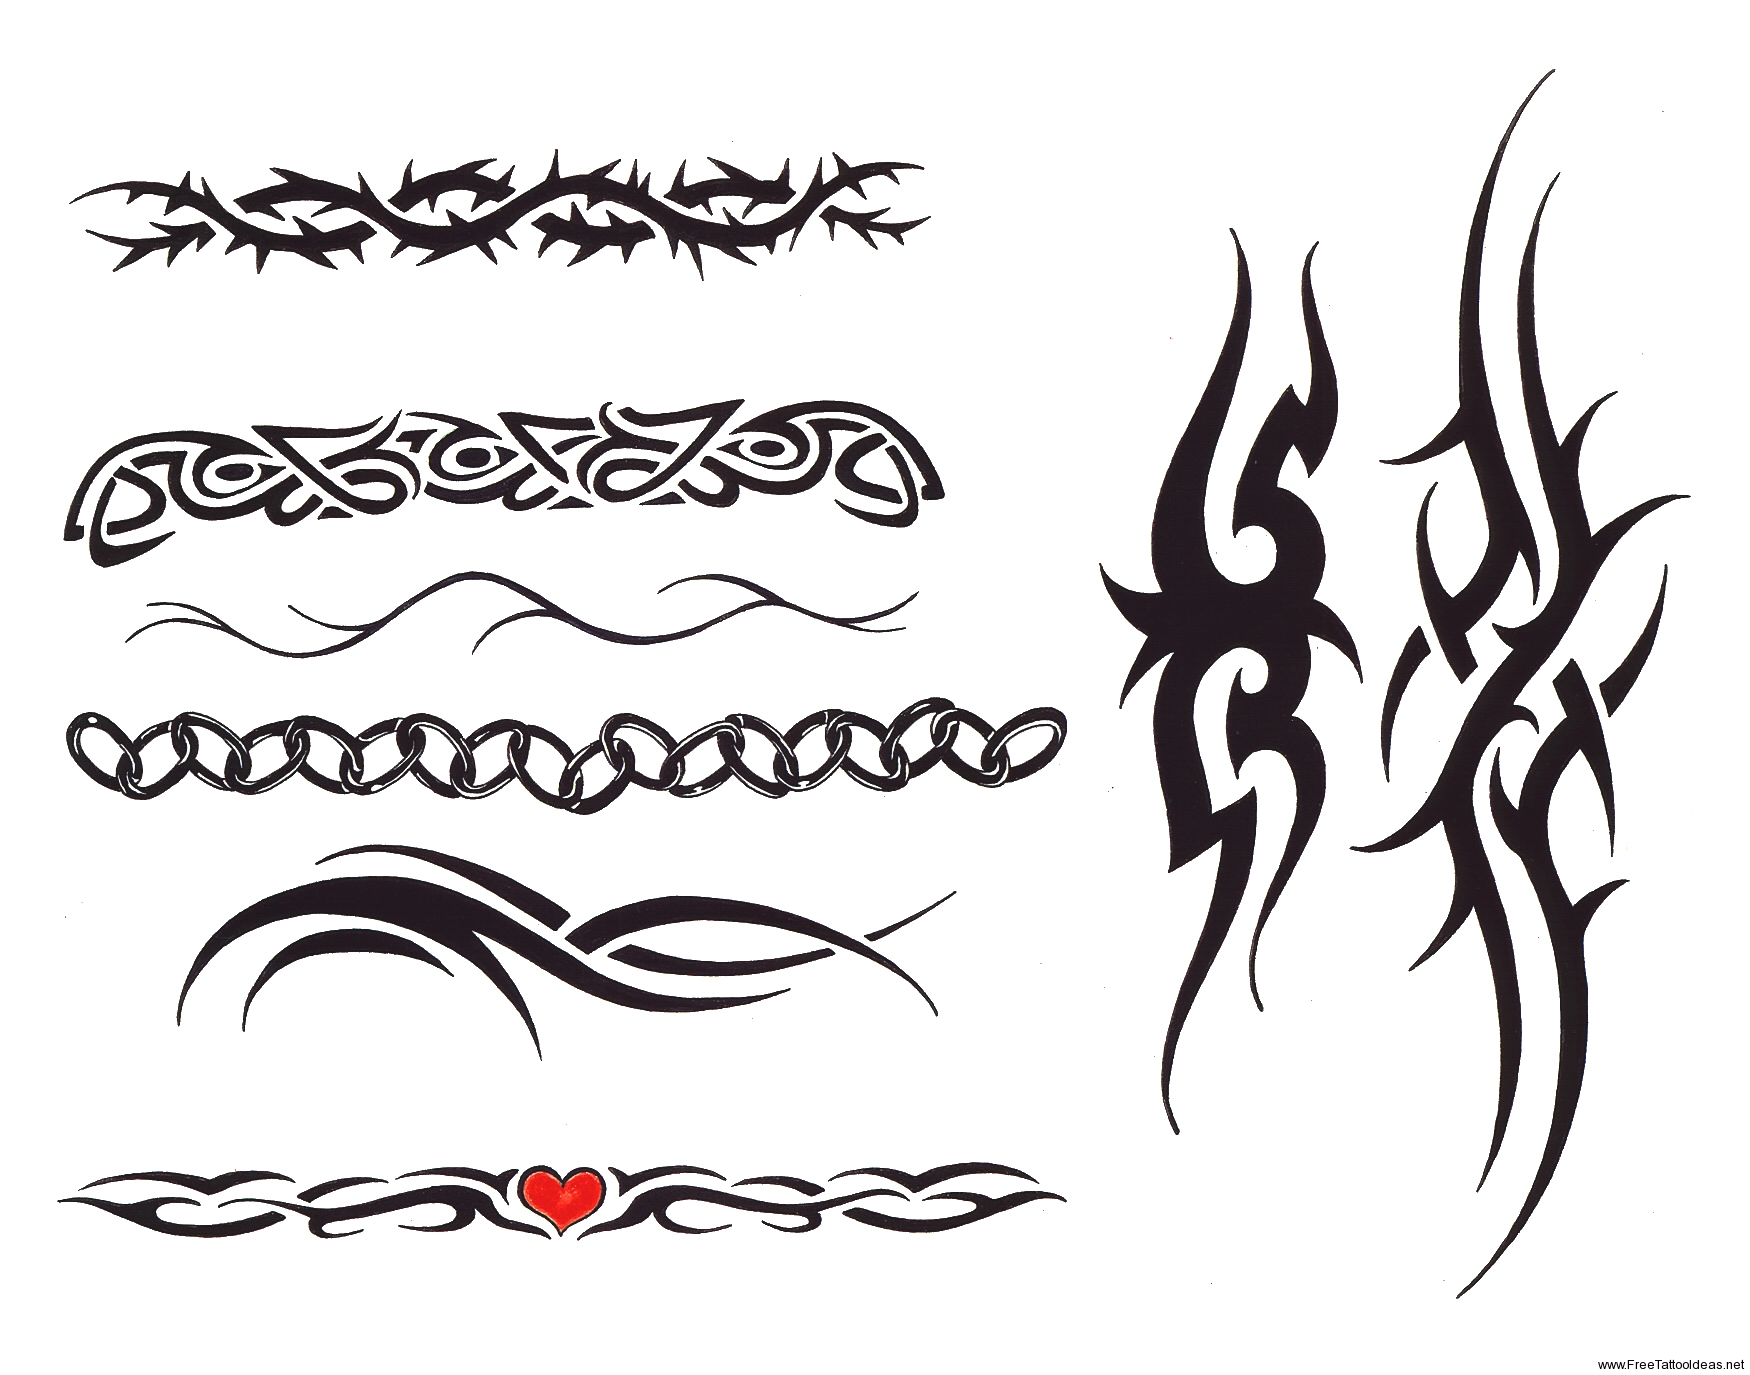 Free Tribal Tattoo Designs For Arms